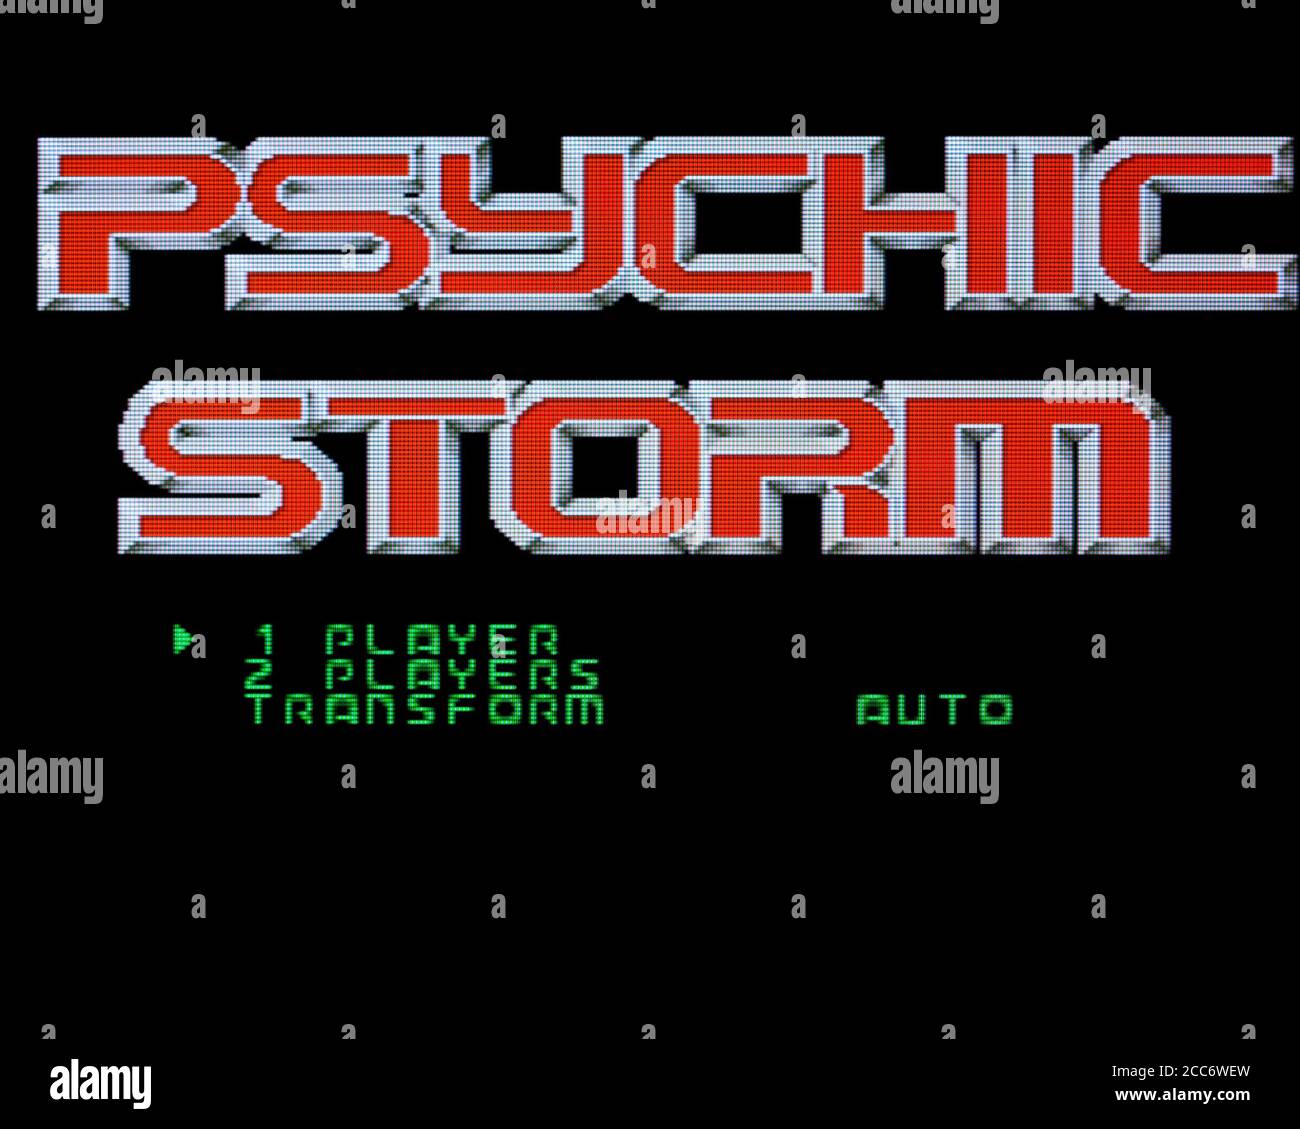 Psychic Storm - PC Engine CD Videogame - Editorial use only Stock Photo